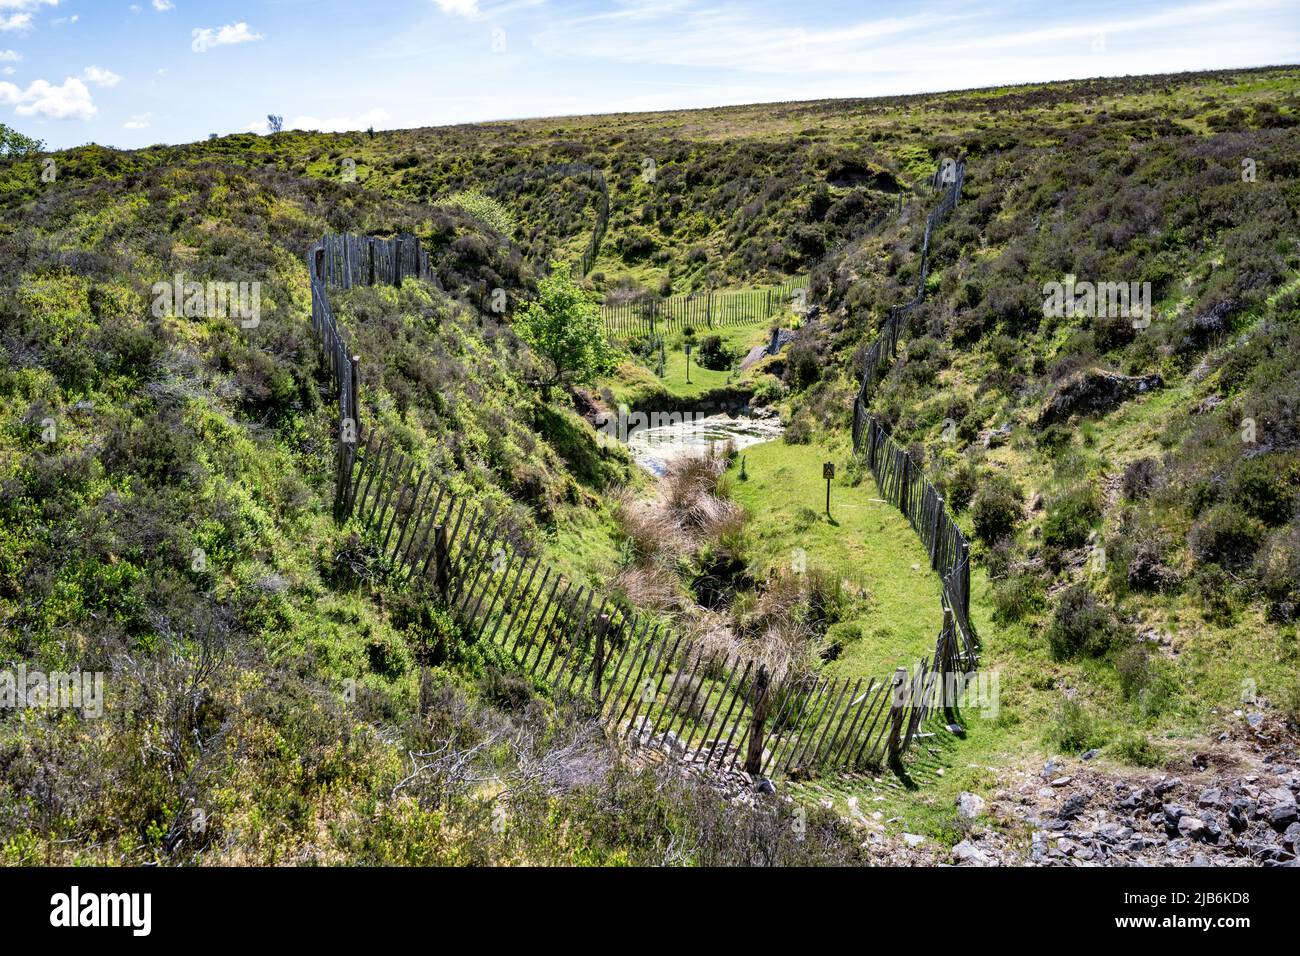 Abandoned tin mine pit, once part of the Vitifer Mine near Birch Tor, Dartmoor, Devon, UK.  Area is fenced off for safety. Stock Photo